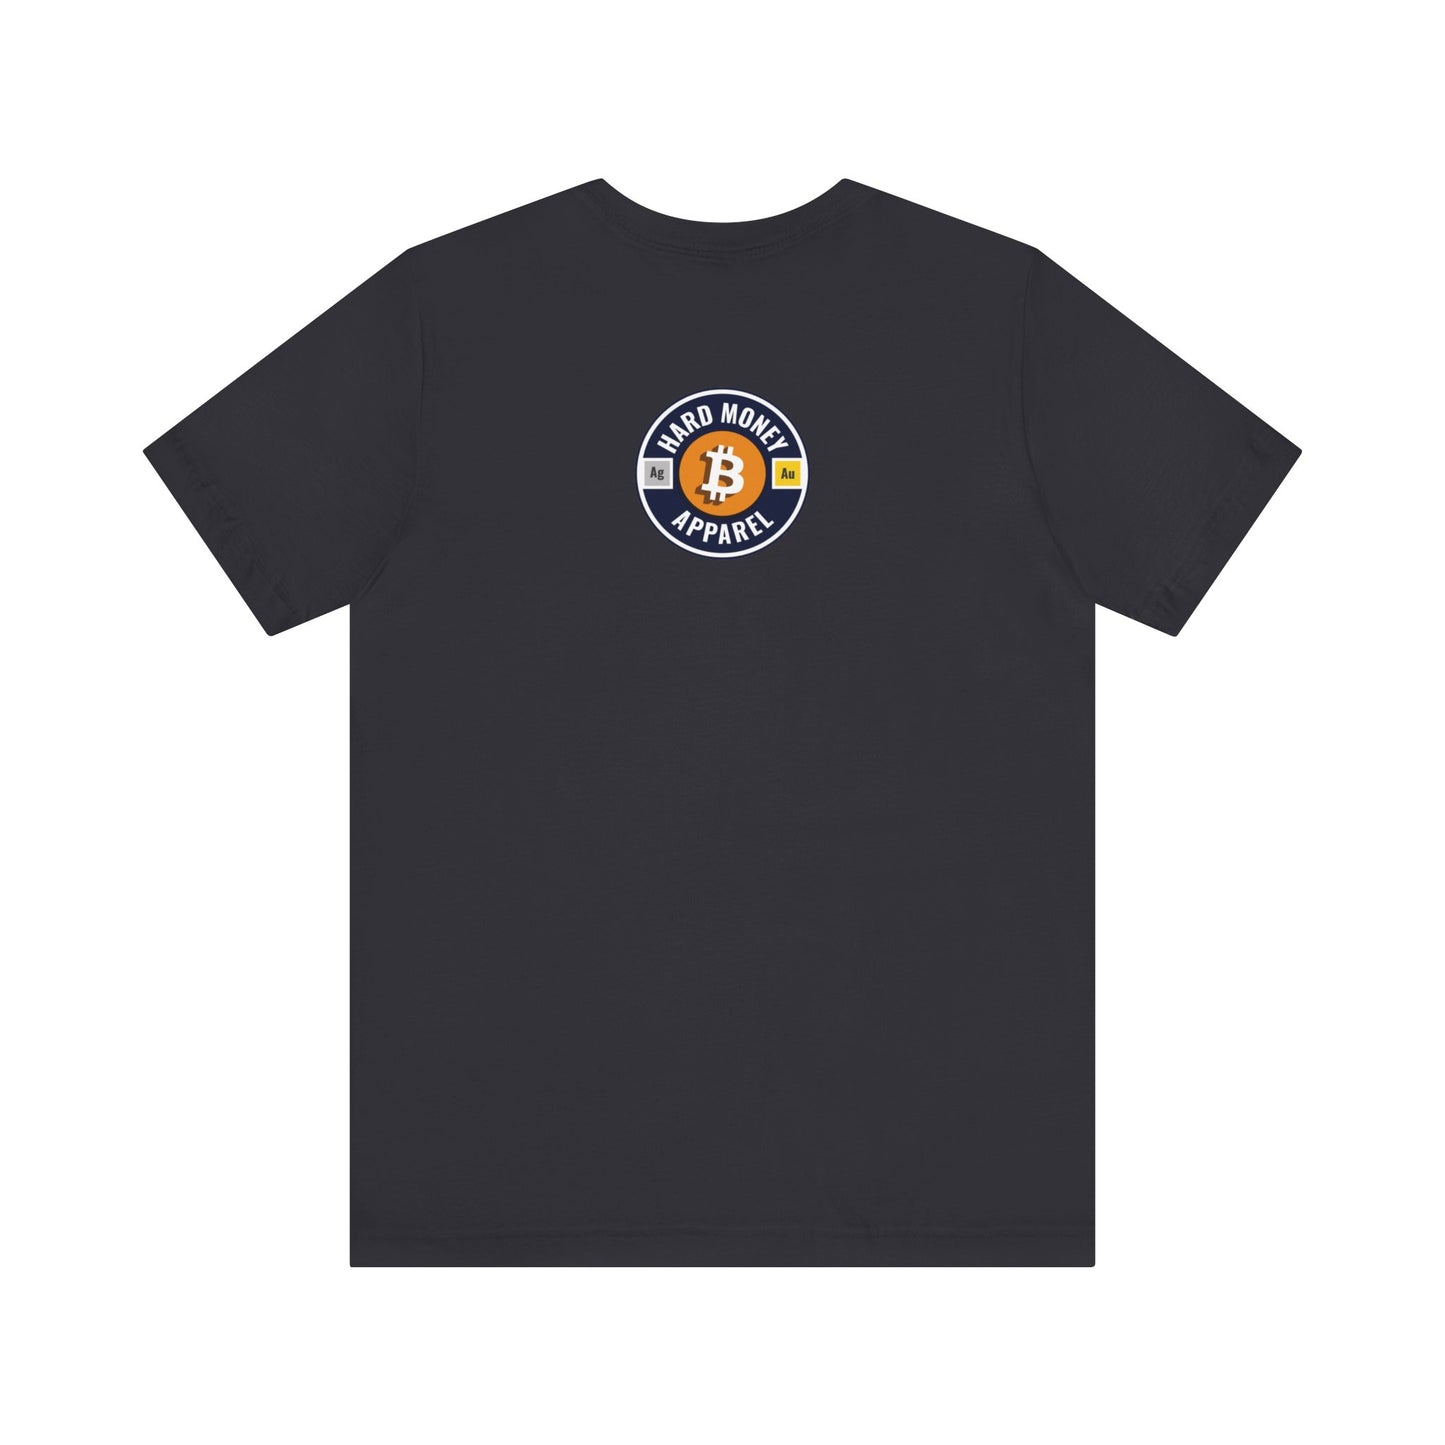 Bitcoin Accepted Here - Unisex T-Shirt